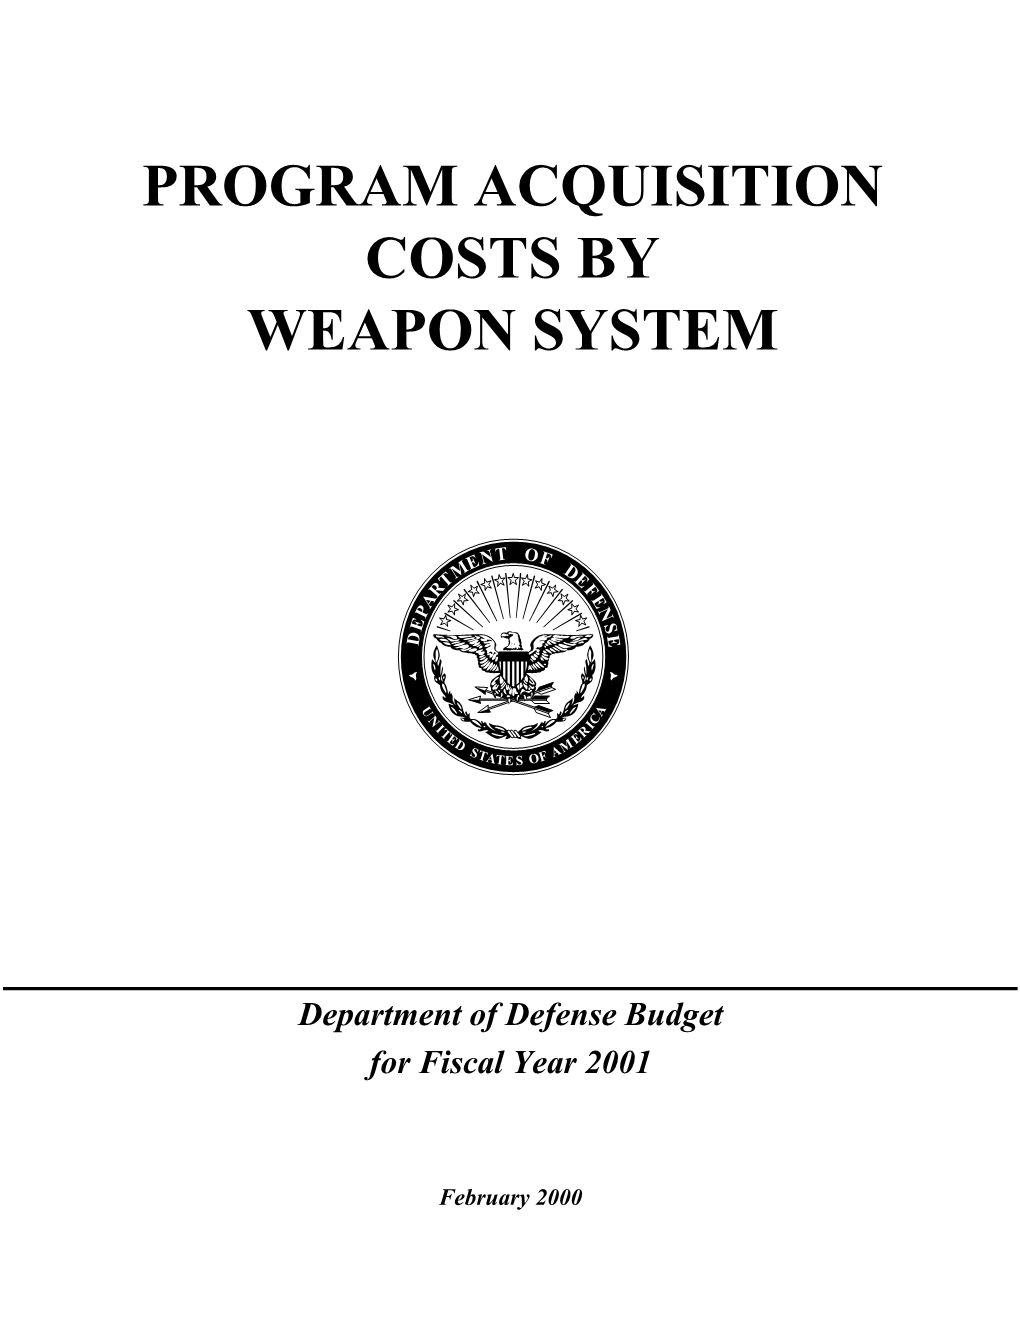 Program Acquisition Costs by Weapons System